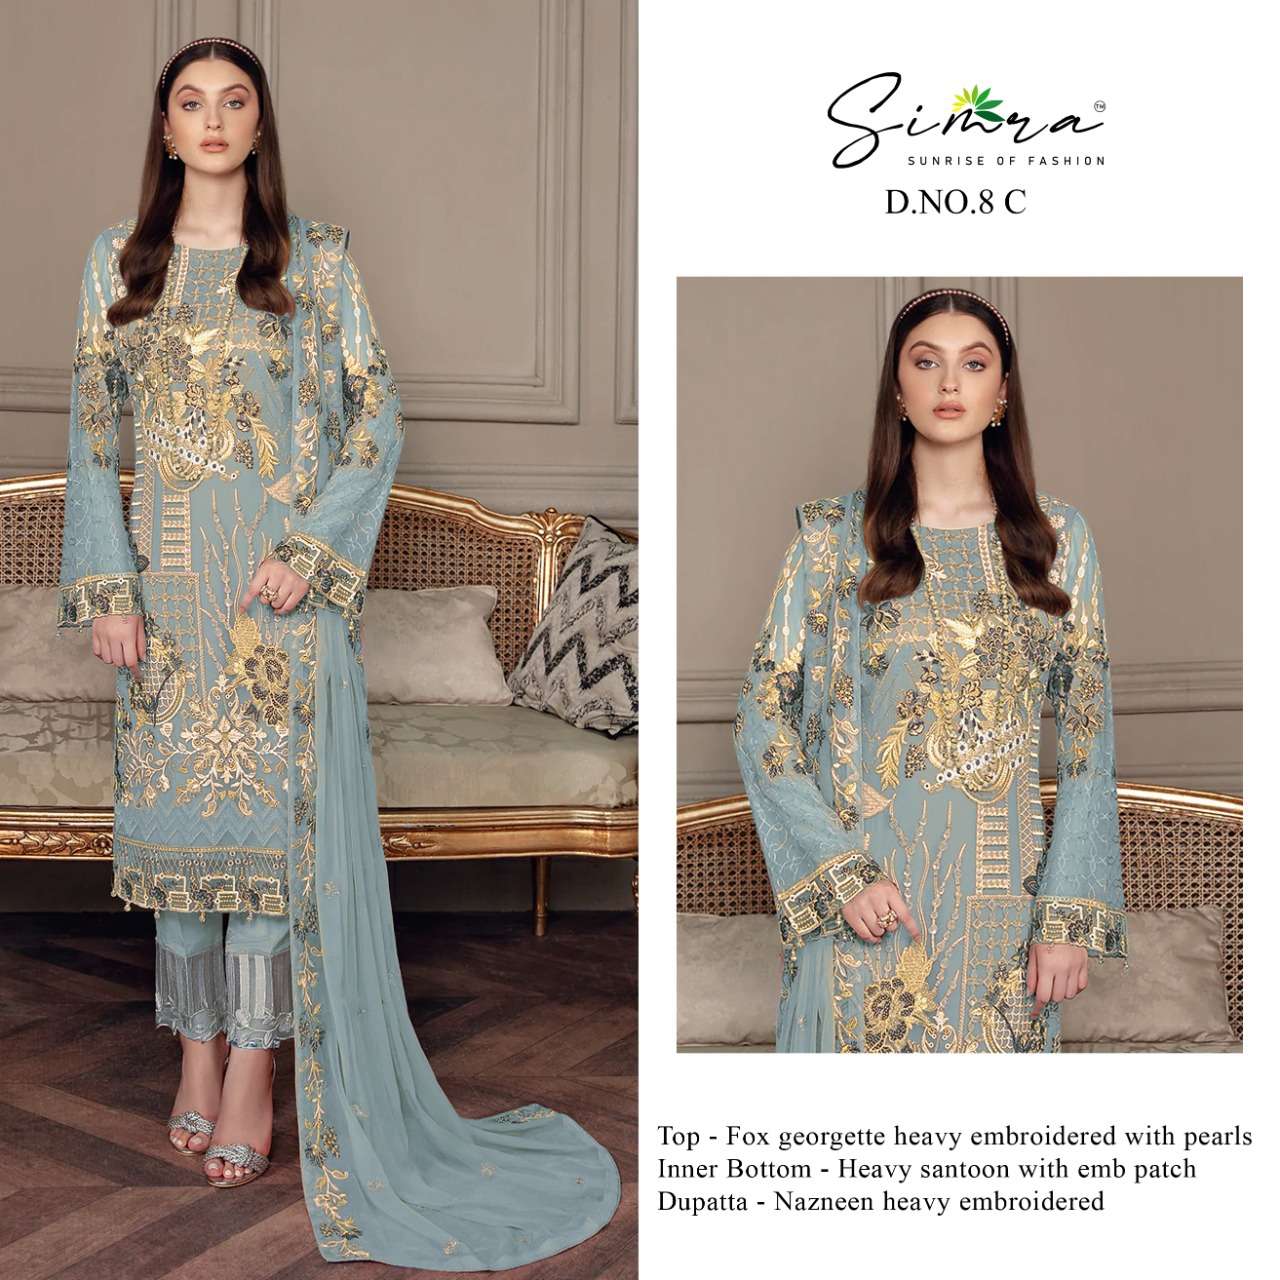  Simra D no. 8 Fox Georgette Heavy Embroidered With Pearls On Wholesale